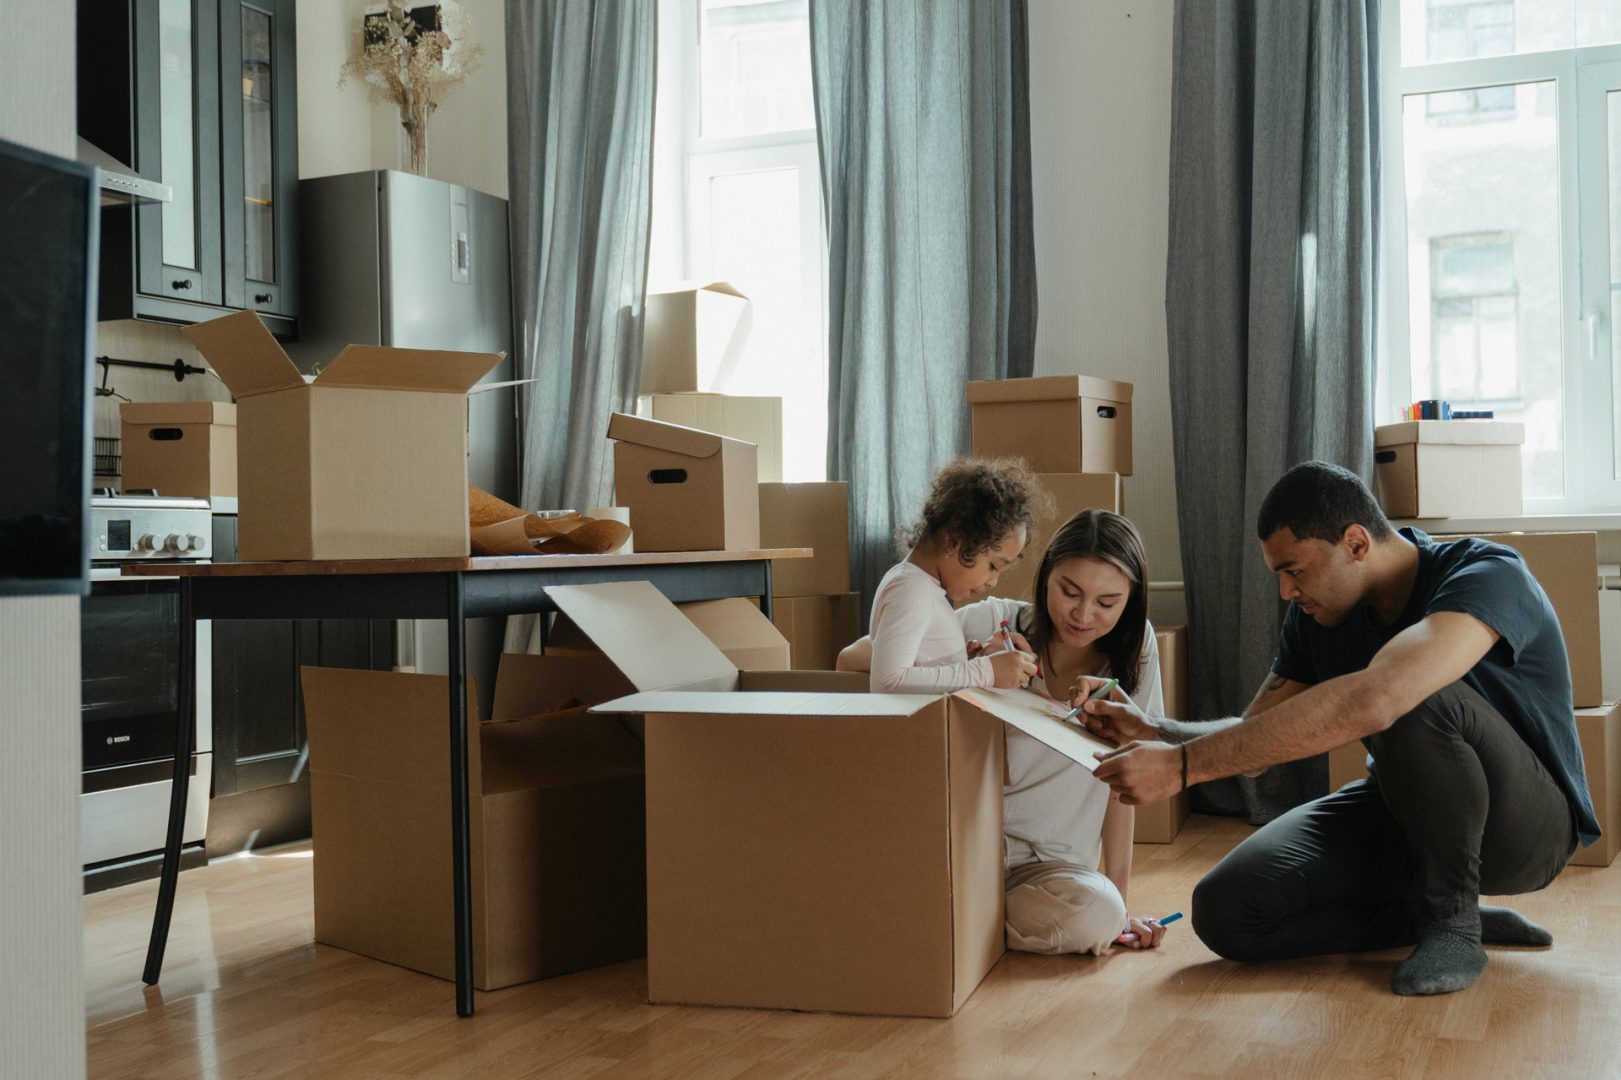 Ways To Make Moving Easier For The Kids